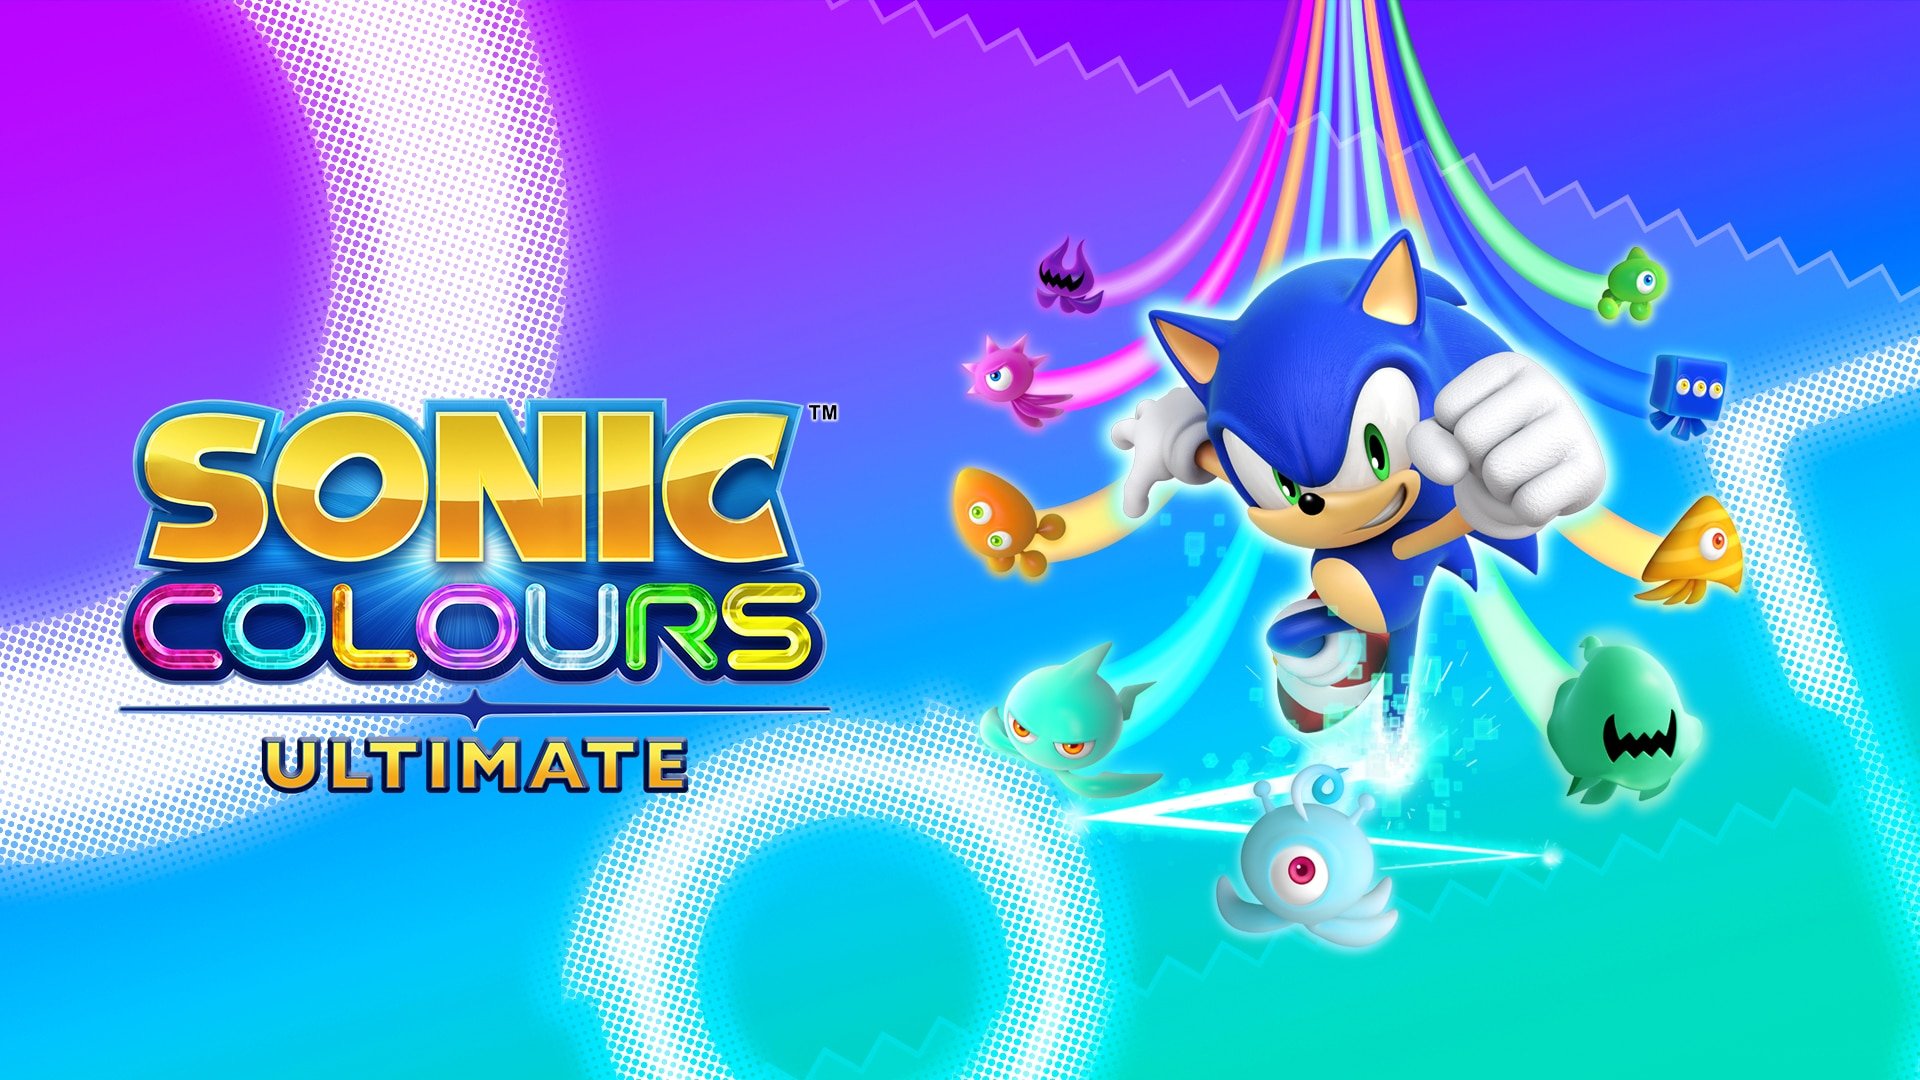 Sonic Colours Ultimate nieuwe patch uitgebracht